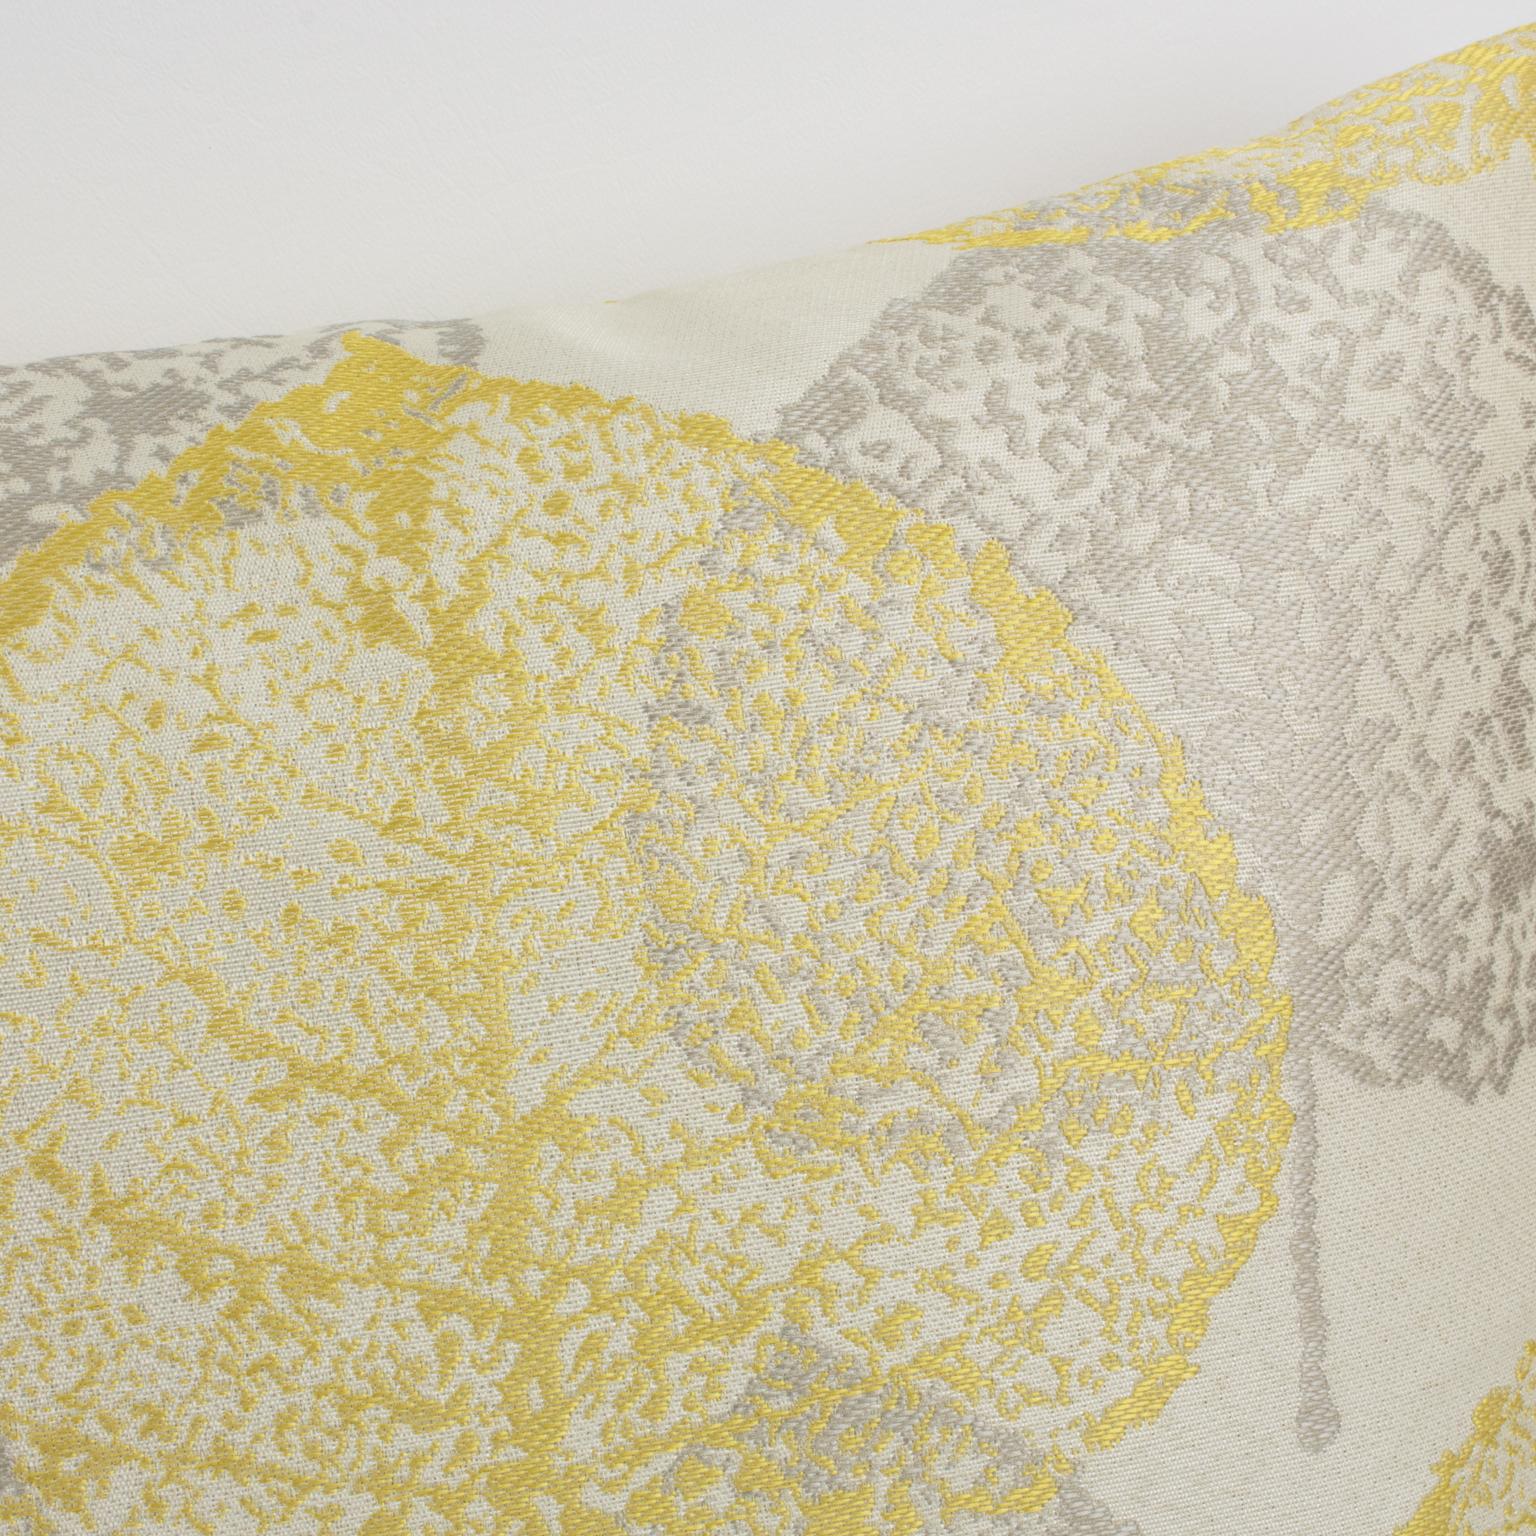 Silver Gray and Yellow Damask Throw Pillows, a pair For Sale 2